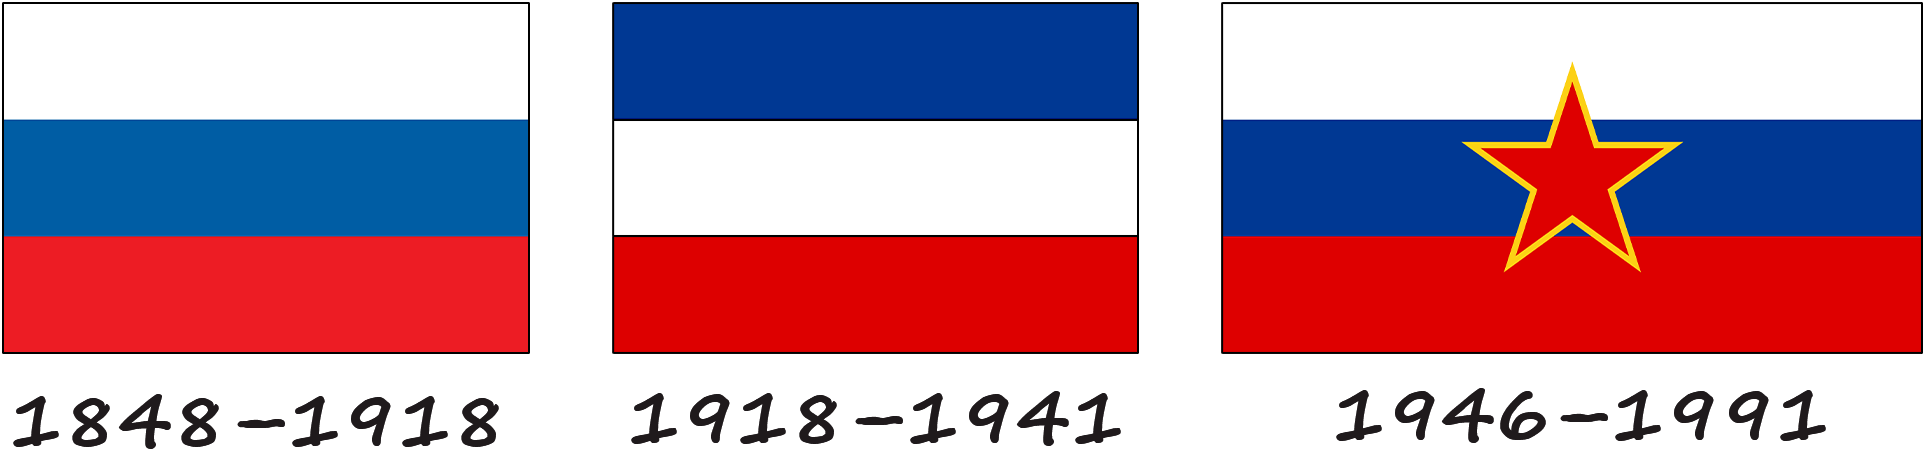 The history of the Slovenian flag